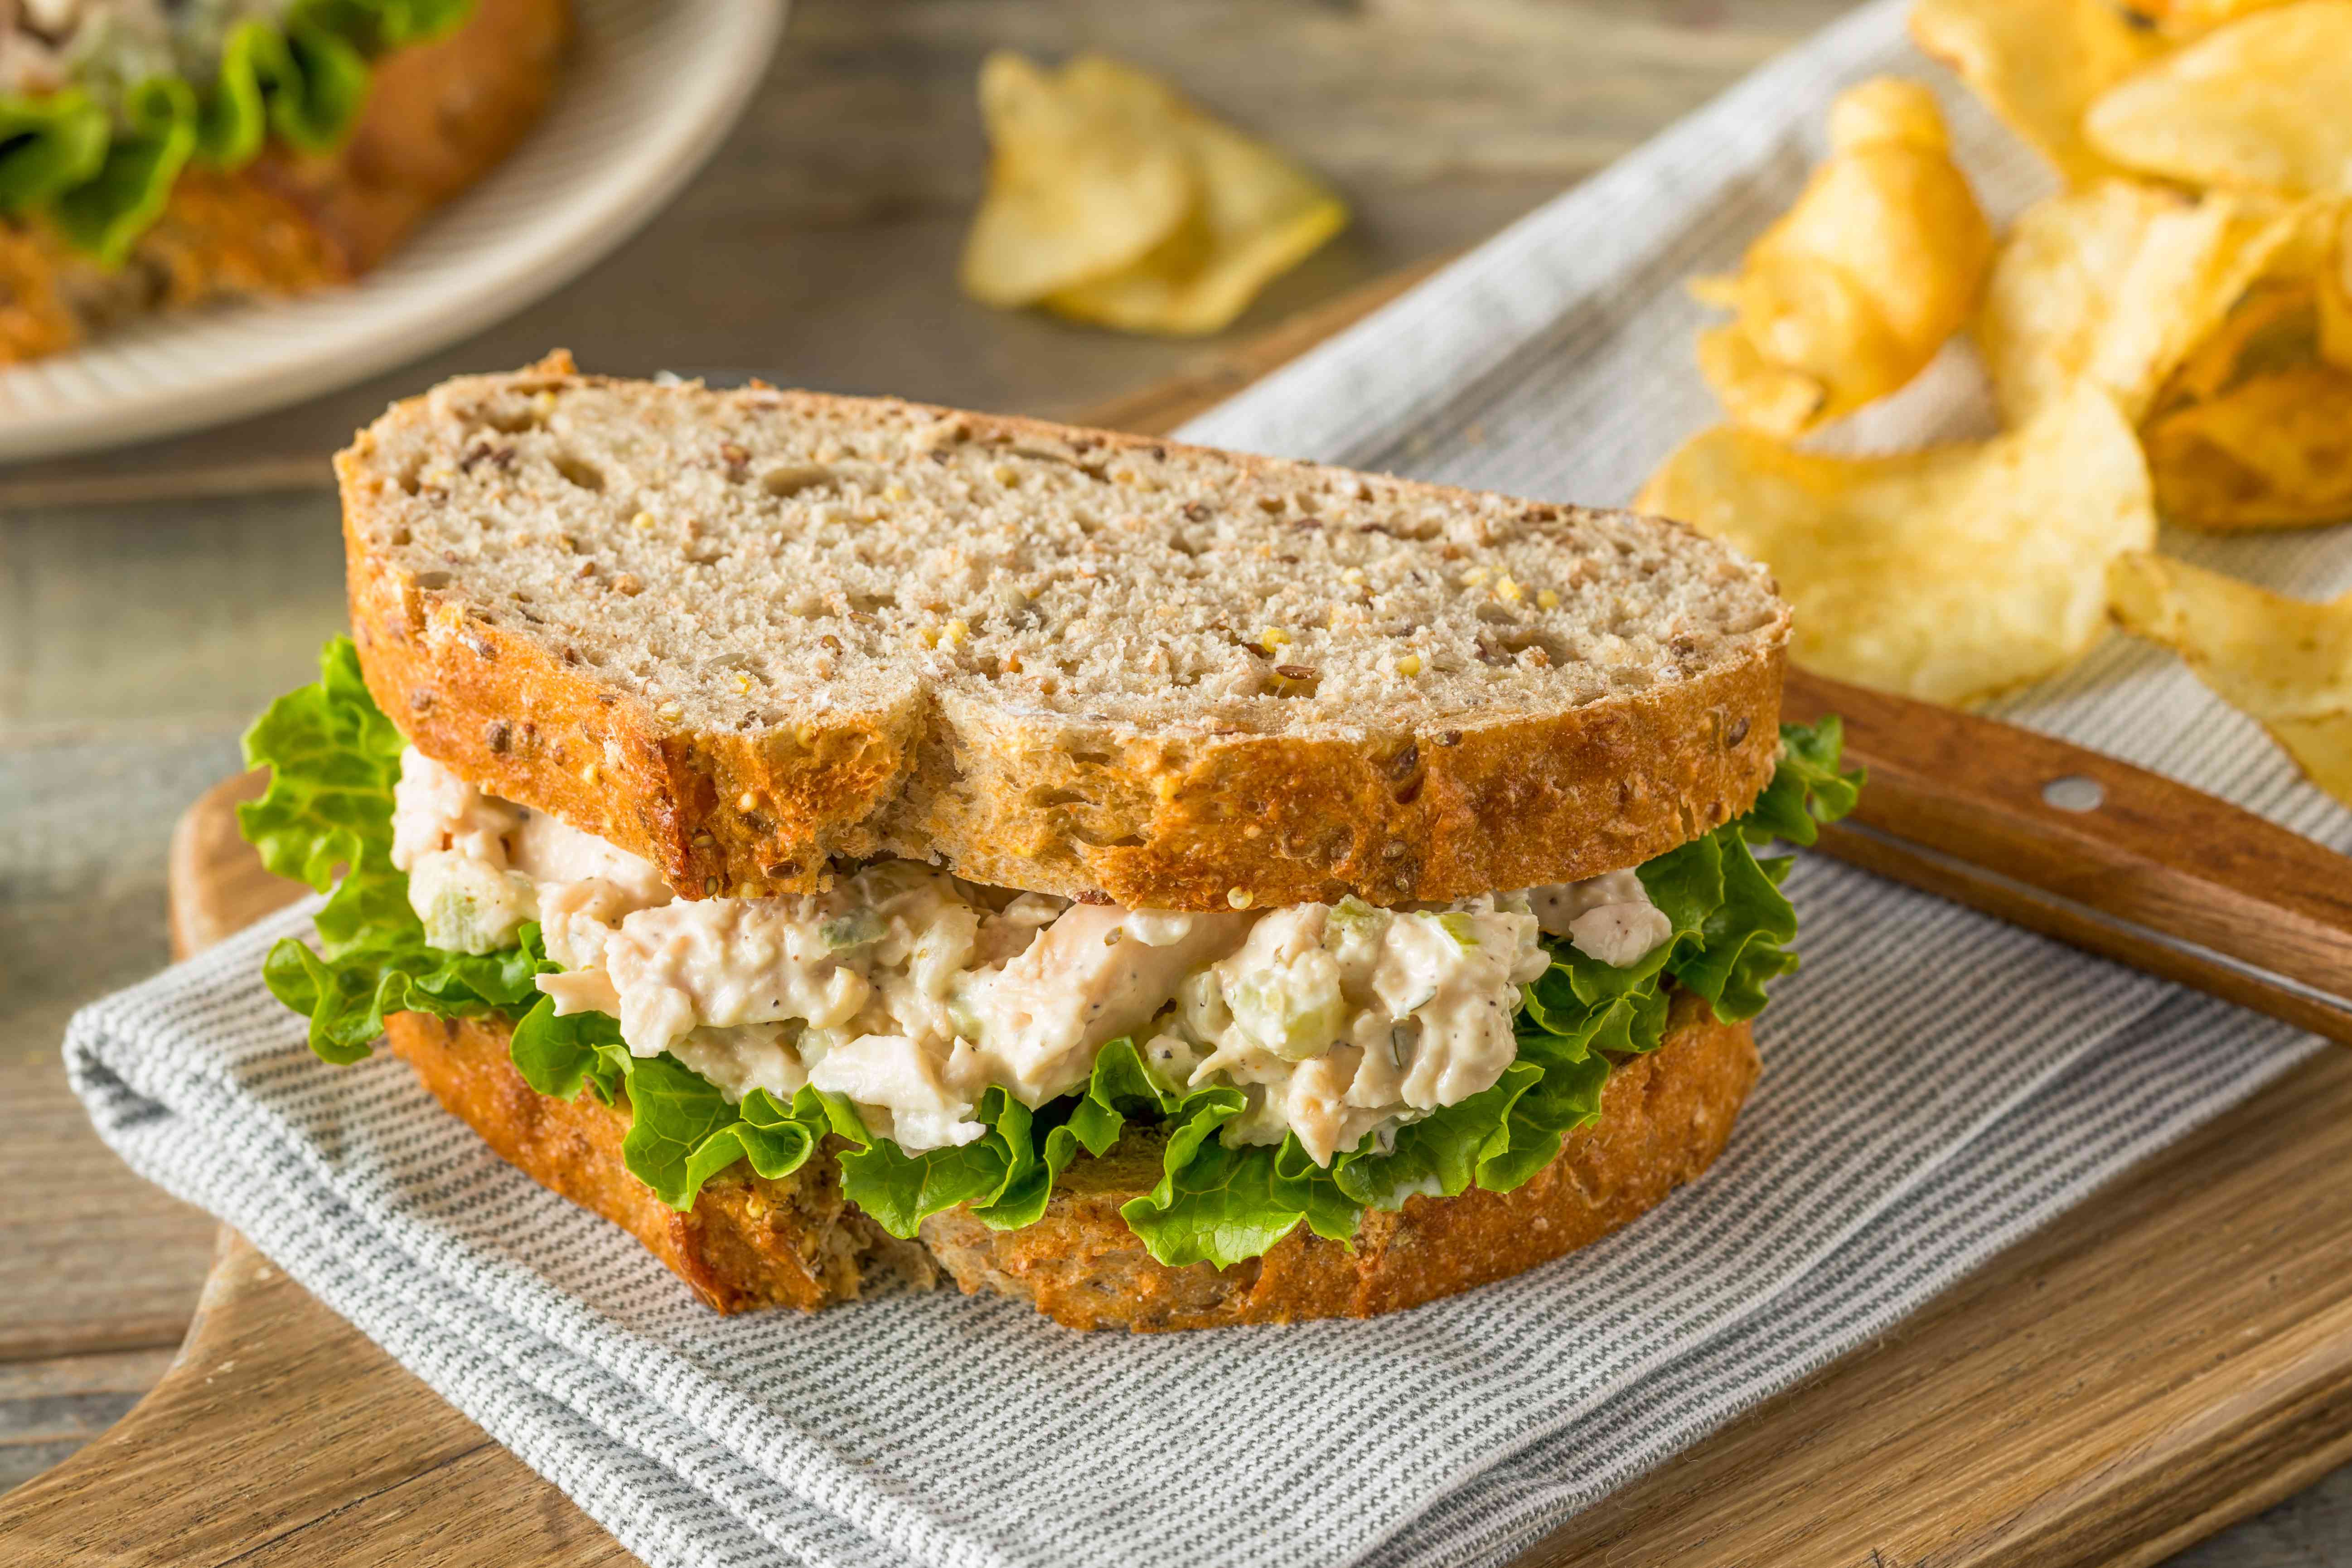 The 1-Ingredient Upgrade for Tuna Salad Sandwiches, According to a Food Expert